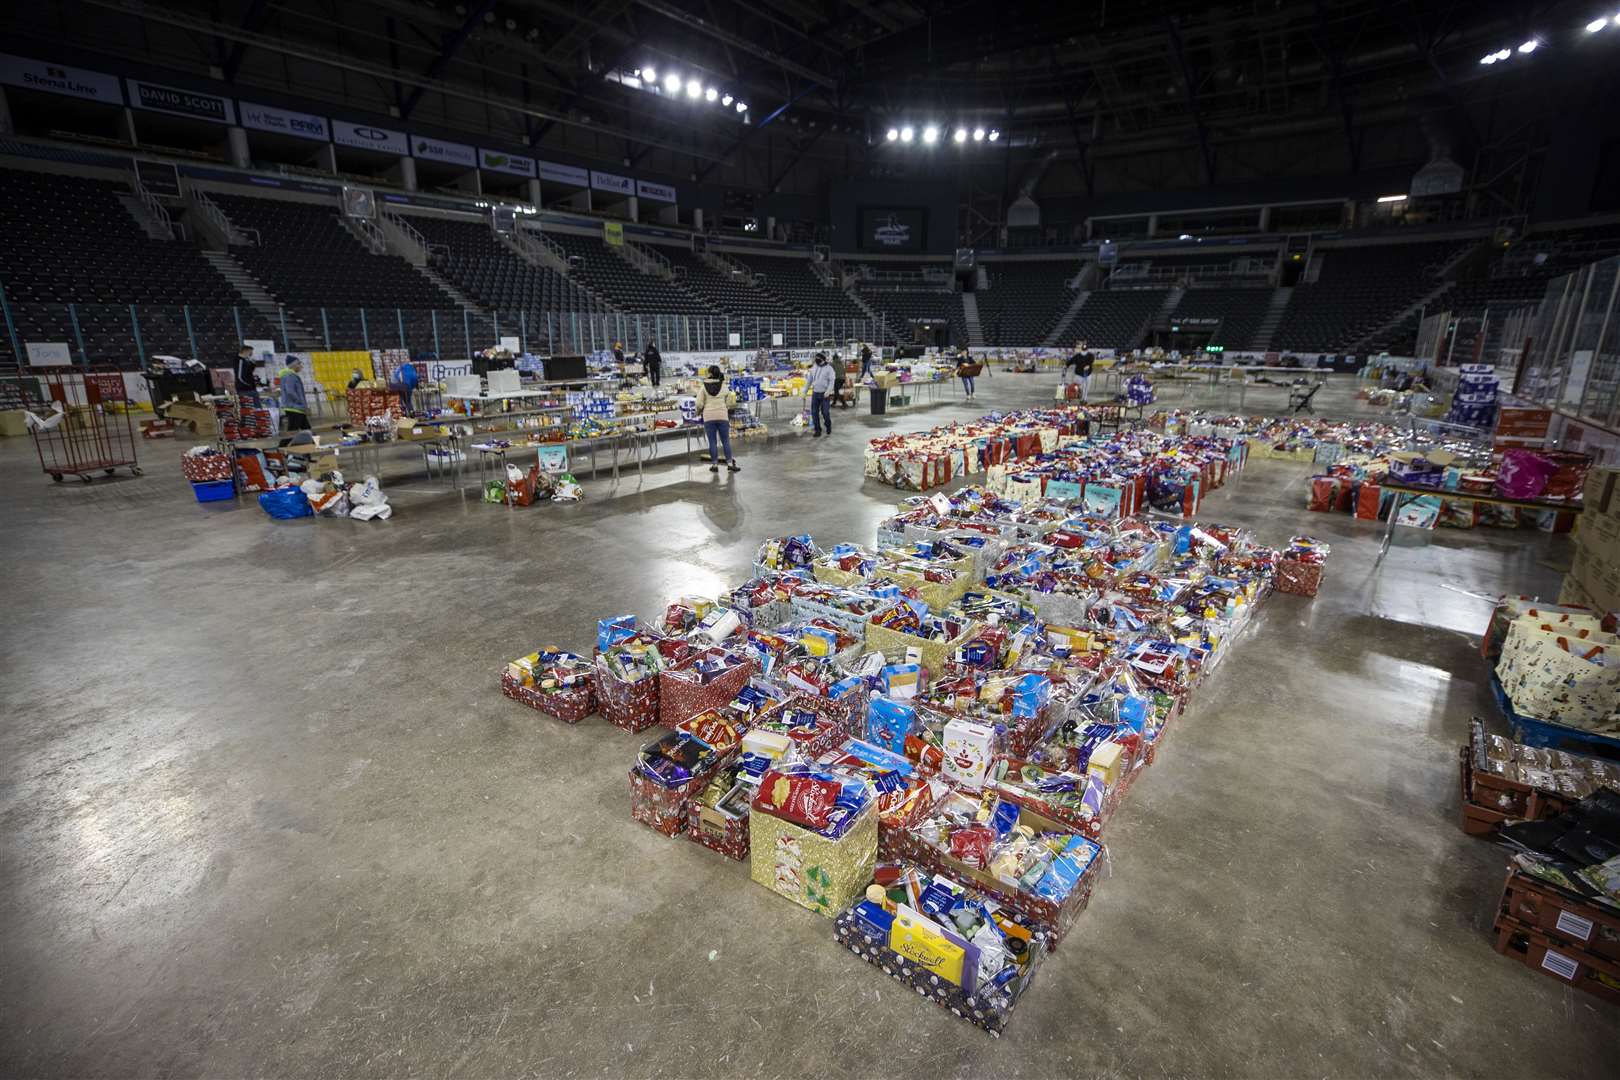 Volunteers sorting Christmas food parcels and hampers on behalf of the North Belfast Advice Partnership last December at the SSE Arena Belfast (Liam McBurney/PA)